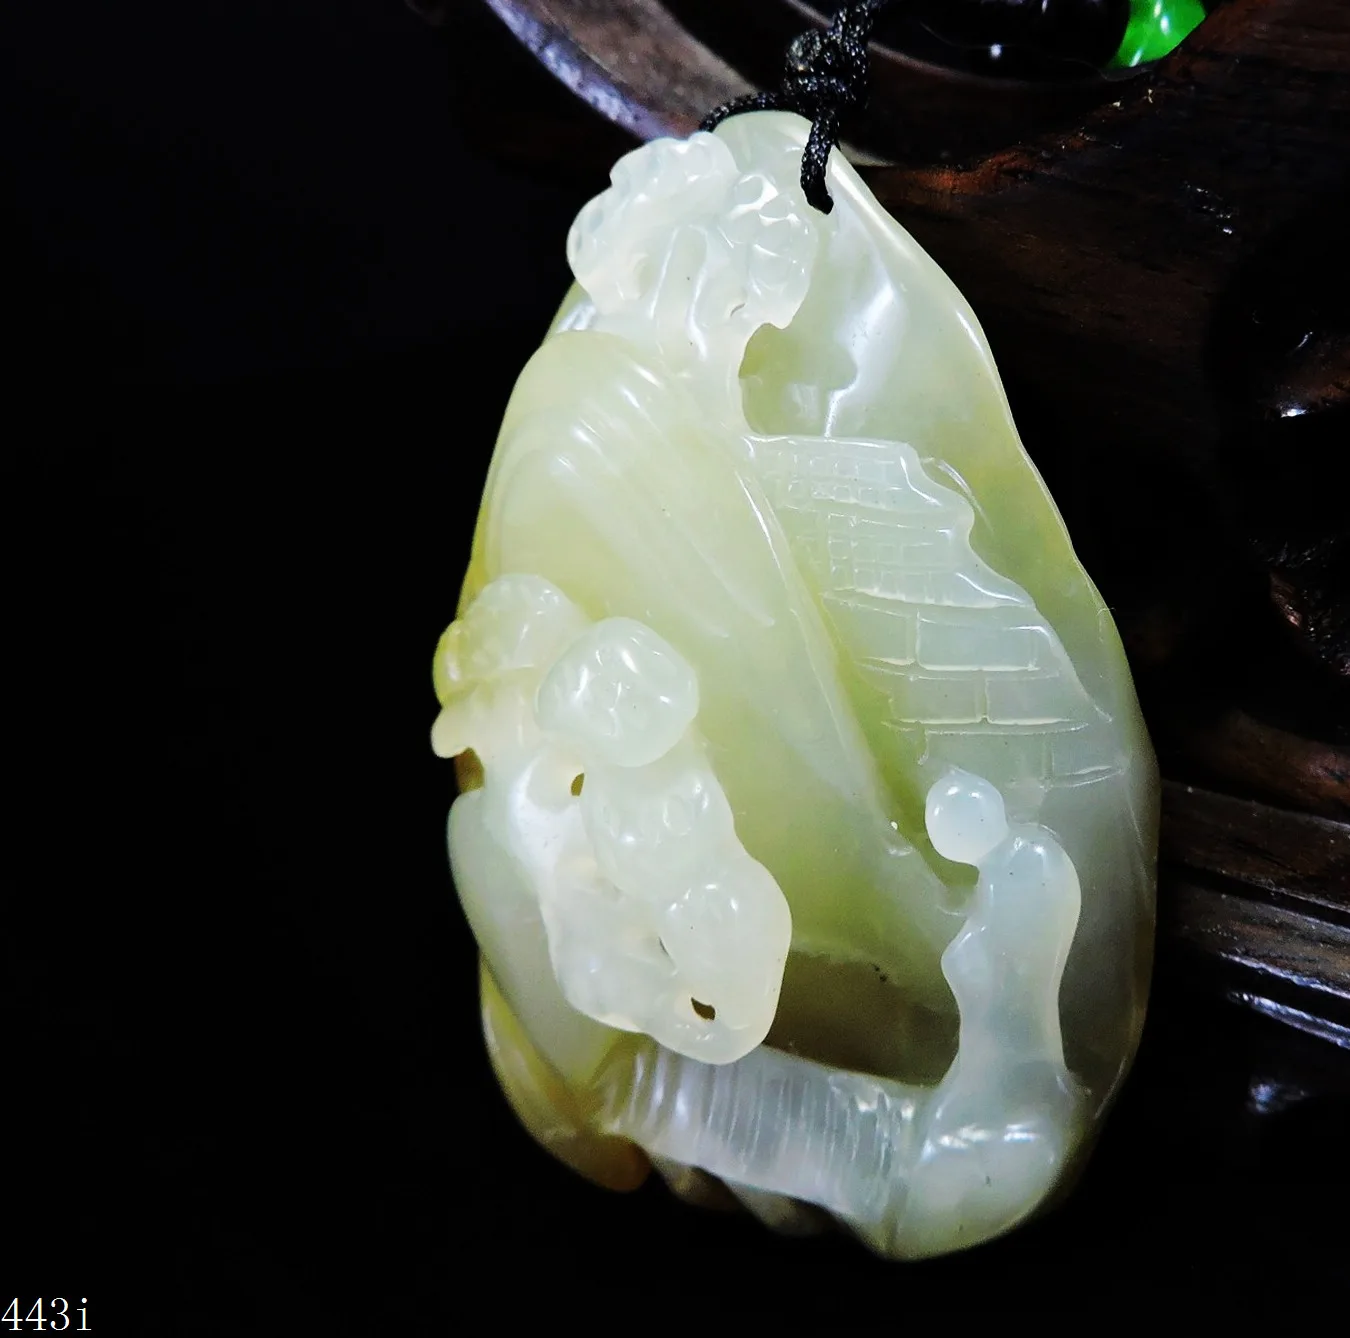 Jade Jewelry Natural Jade Pendant Necklace Hand-Carved monks on the bridge Jadeite Necklace Pendant Gift No Treatment 443i